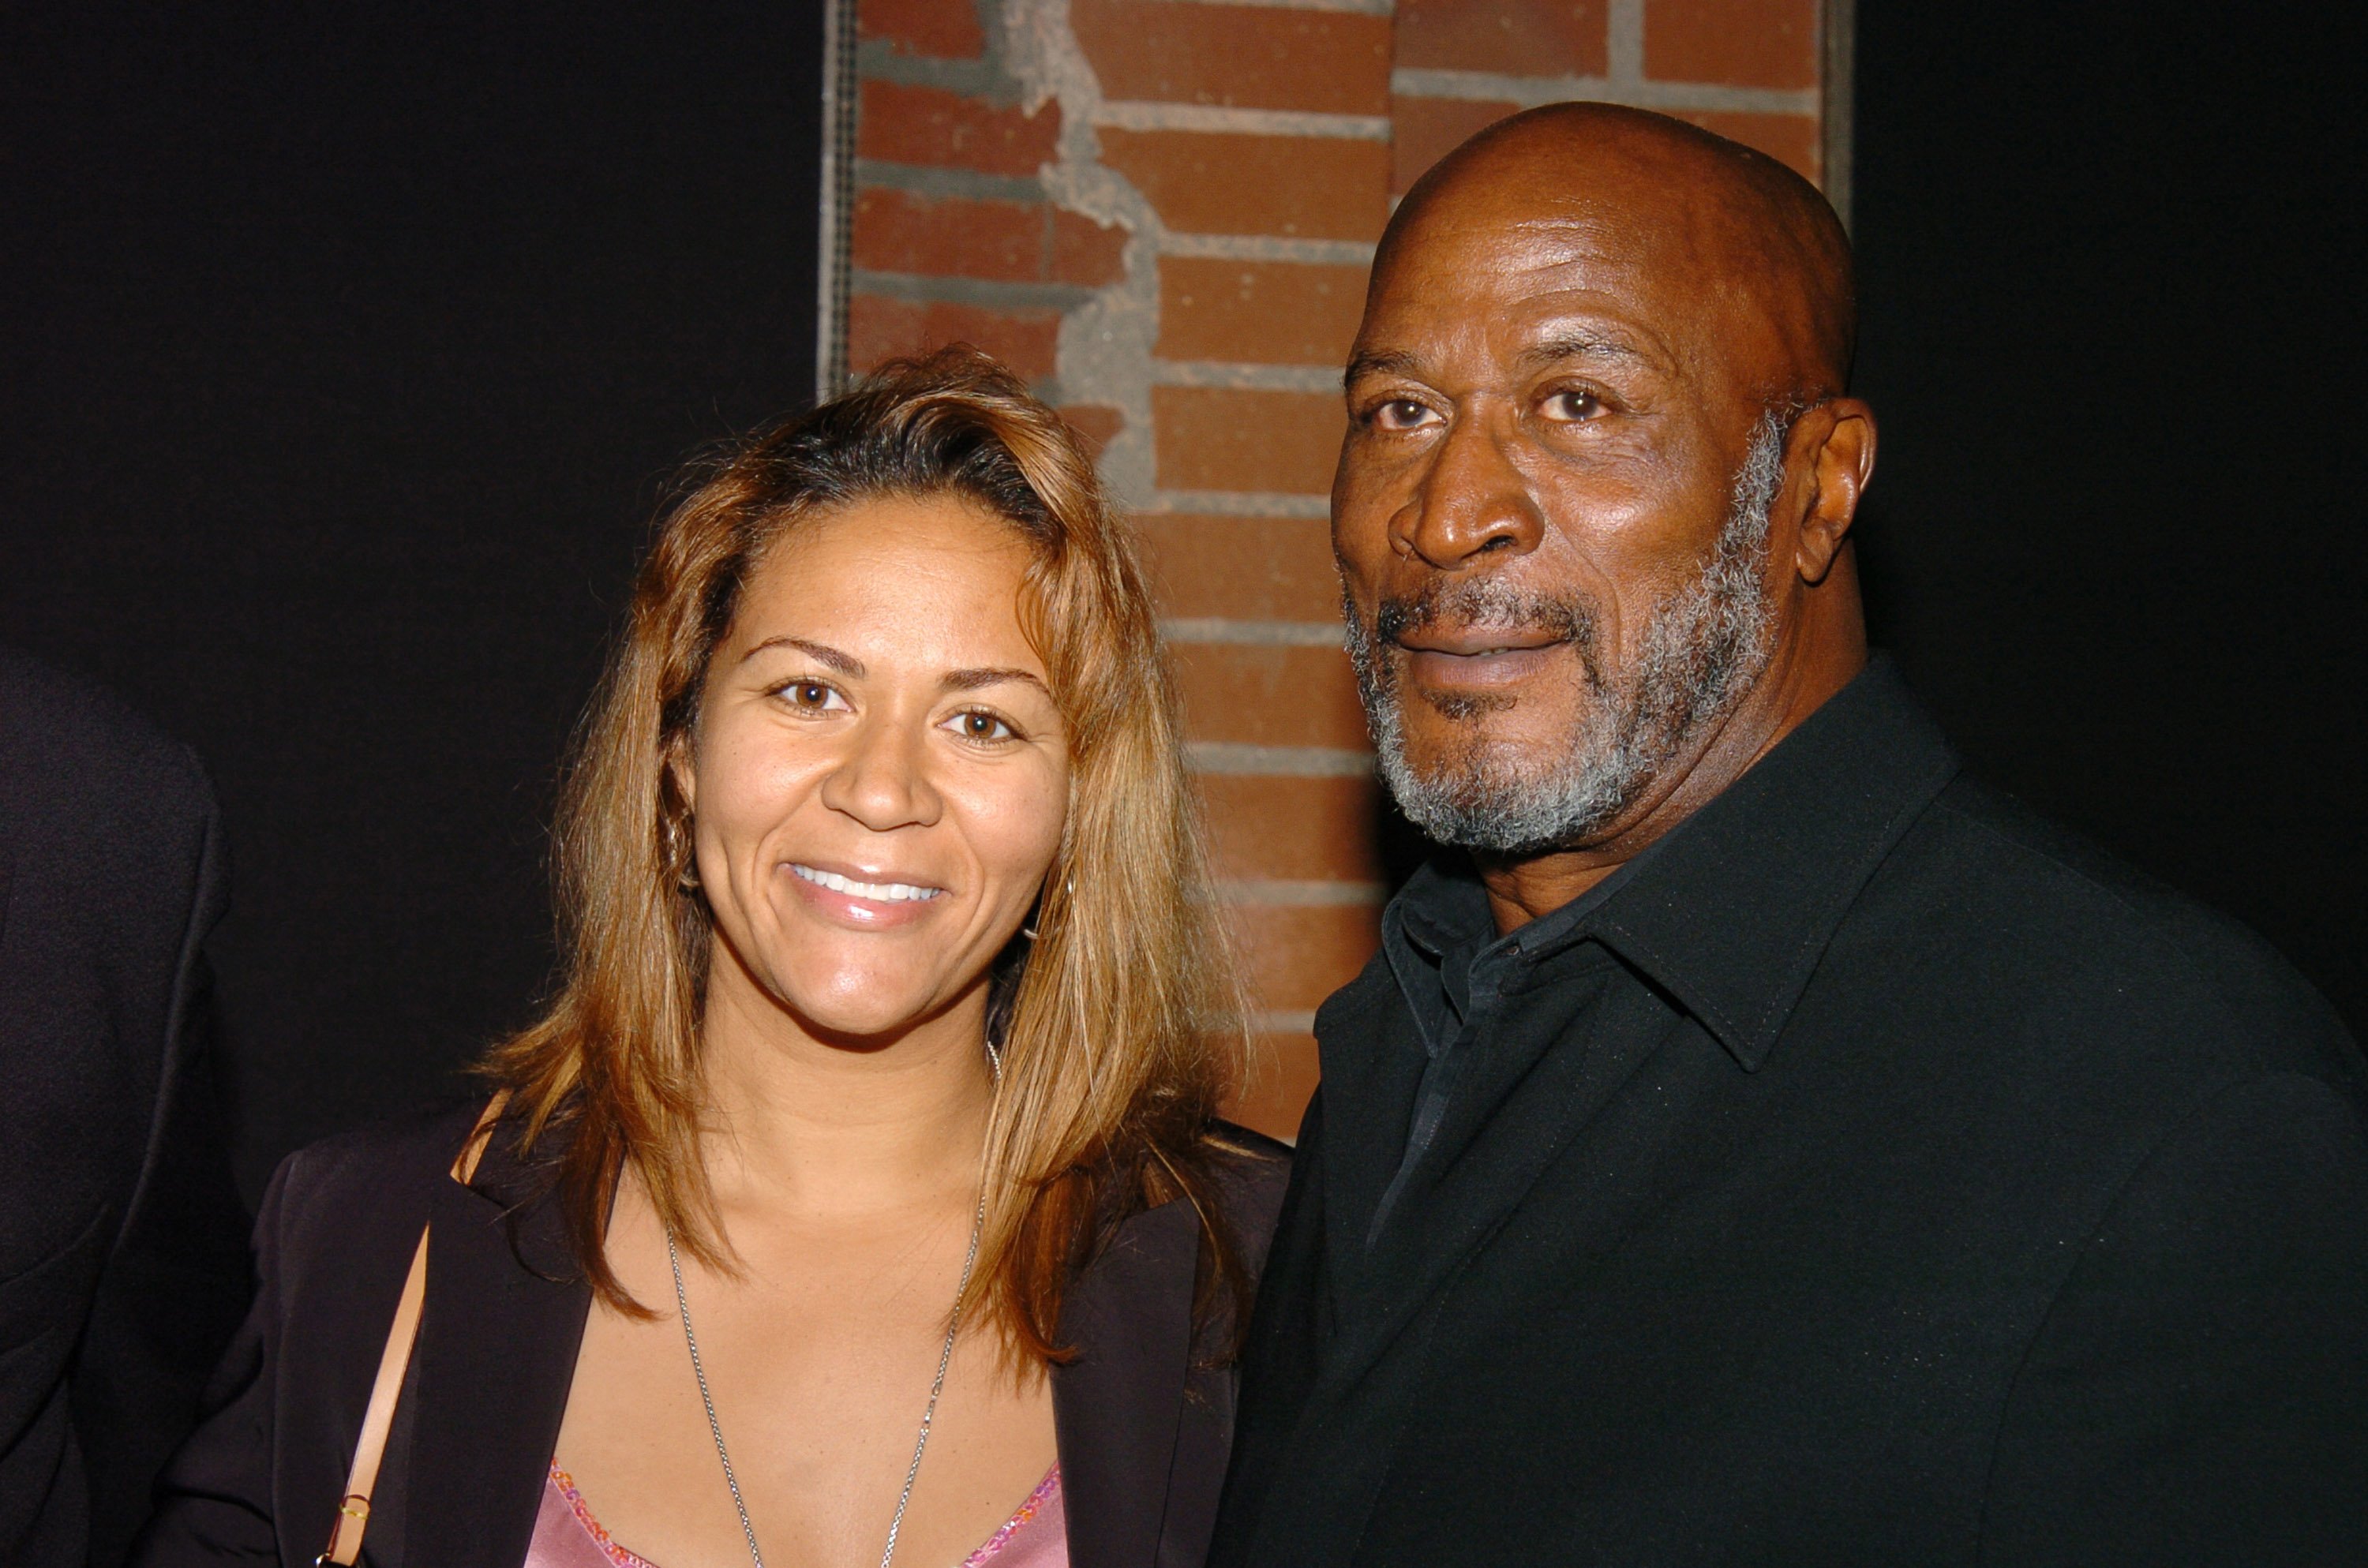 John Amos and daughter Shannon at the Cure Autism Now 's third annual "Acts of Love" in Los Angeles, California on November 8, 2004. | Source: Getty Images